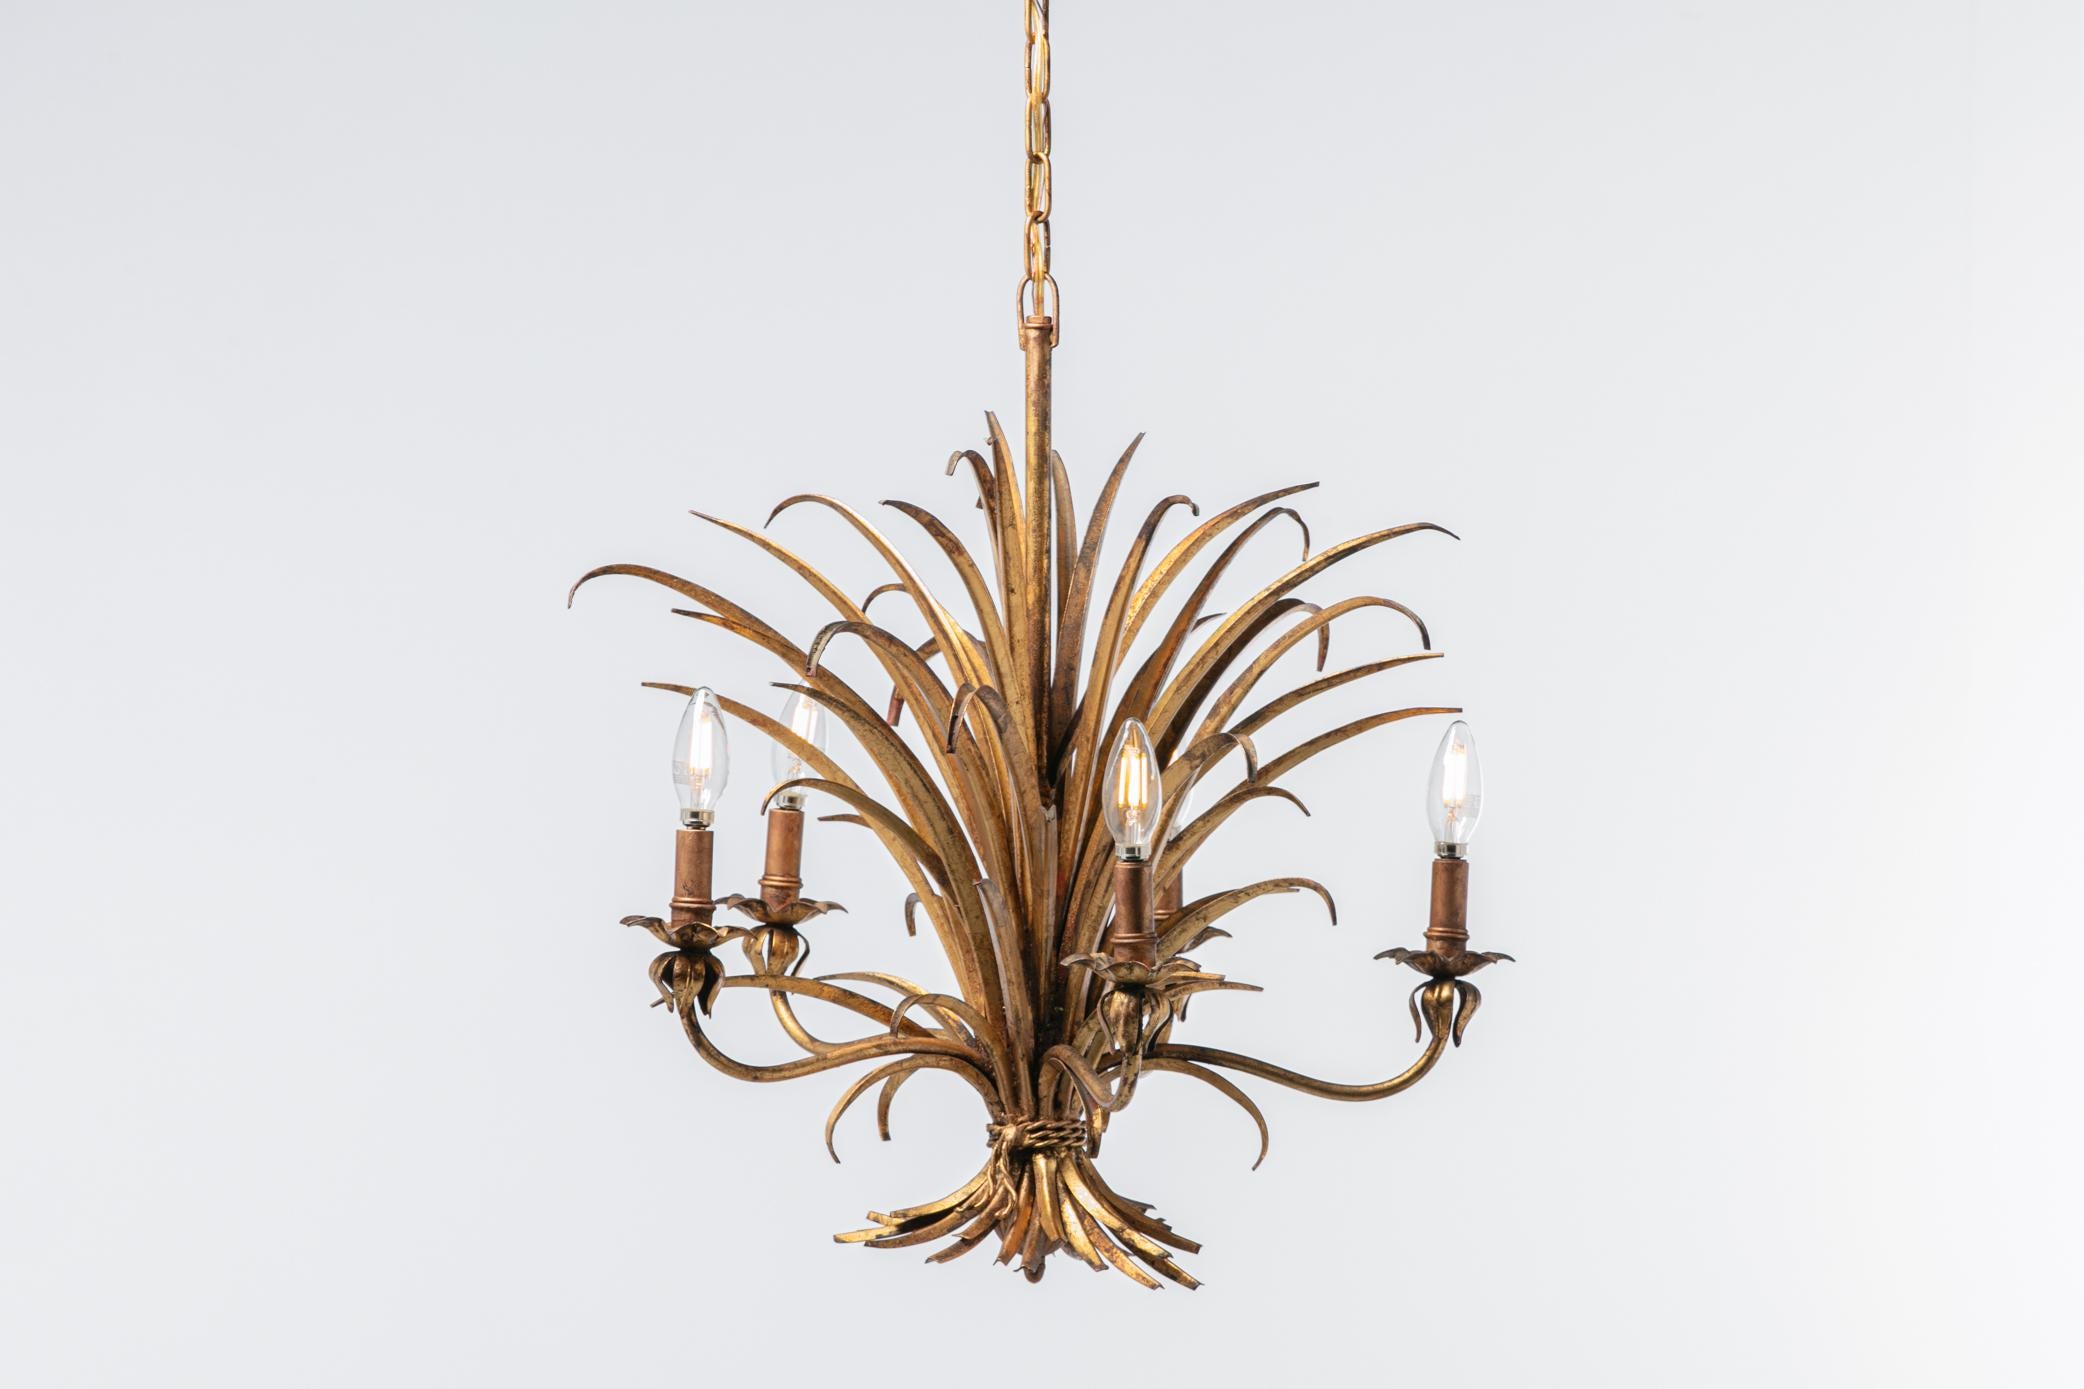 Gilt 1940s sheaf of wheat Hollywood Regency pendant chandelier by Hans Kögl fully restored from top to bottom by UL Certified Professionals. This particular Hans Kögl chandelier was originally brought to the US by a World War II American GI when